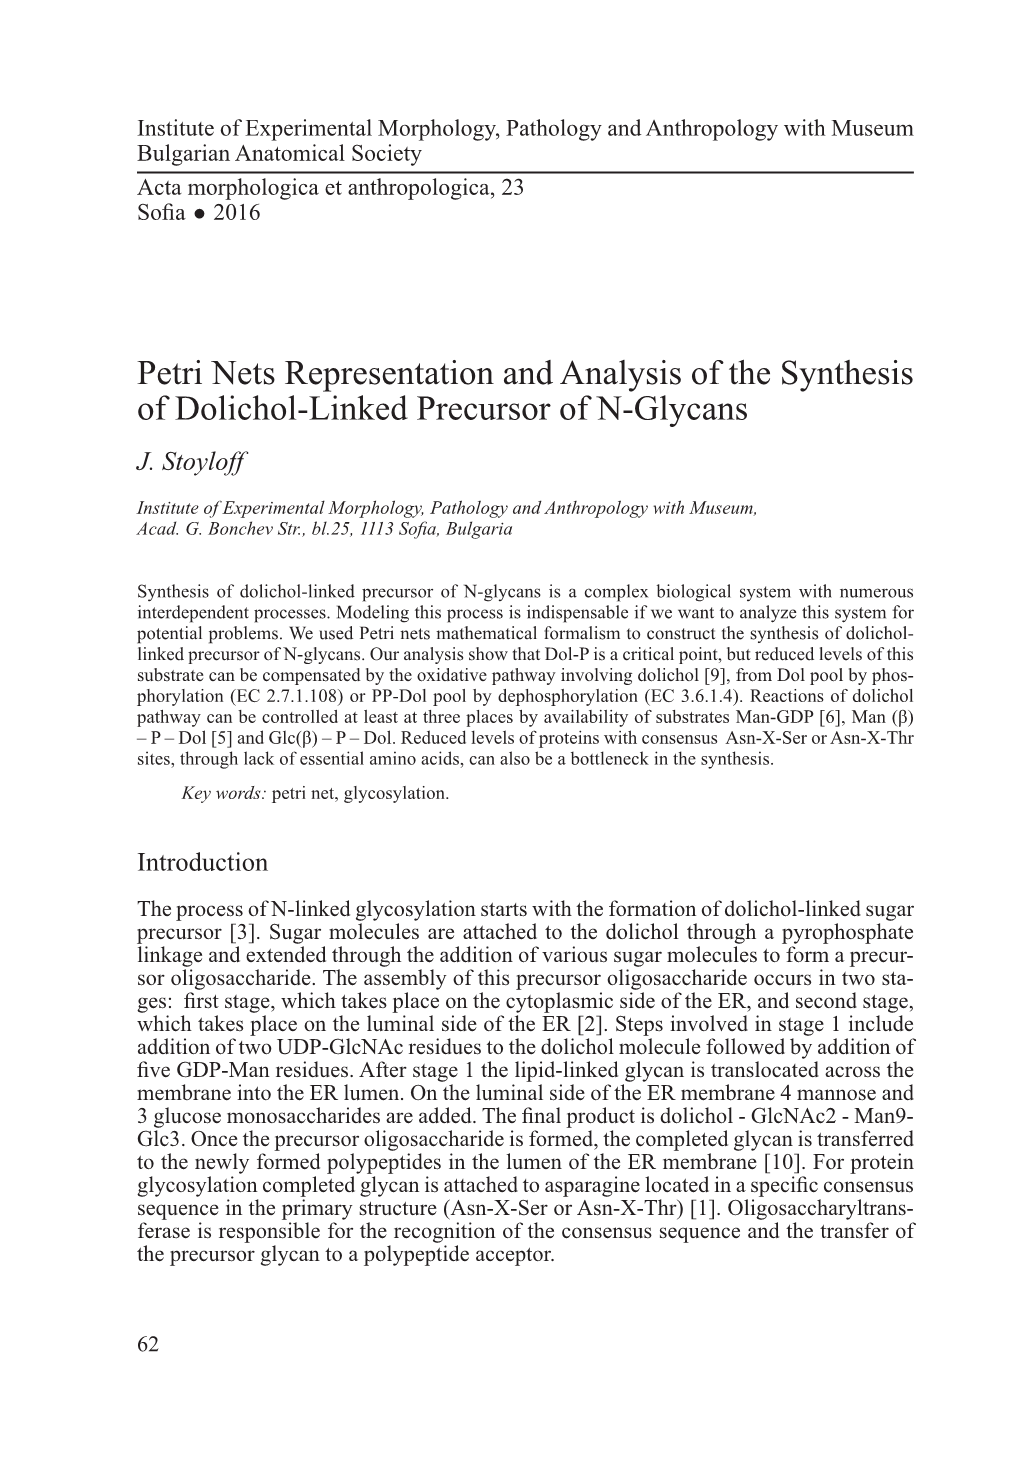 Petri Nets Representation and Analysis of the Synthesis of Dolichol-Linked Precursor of N-Glycans J